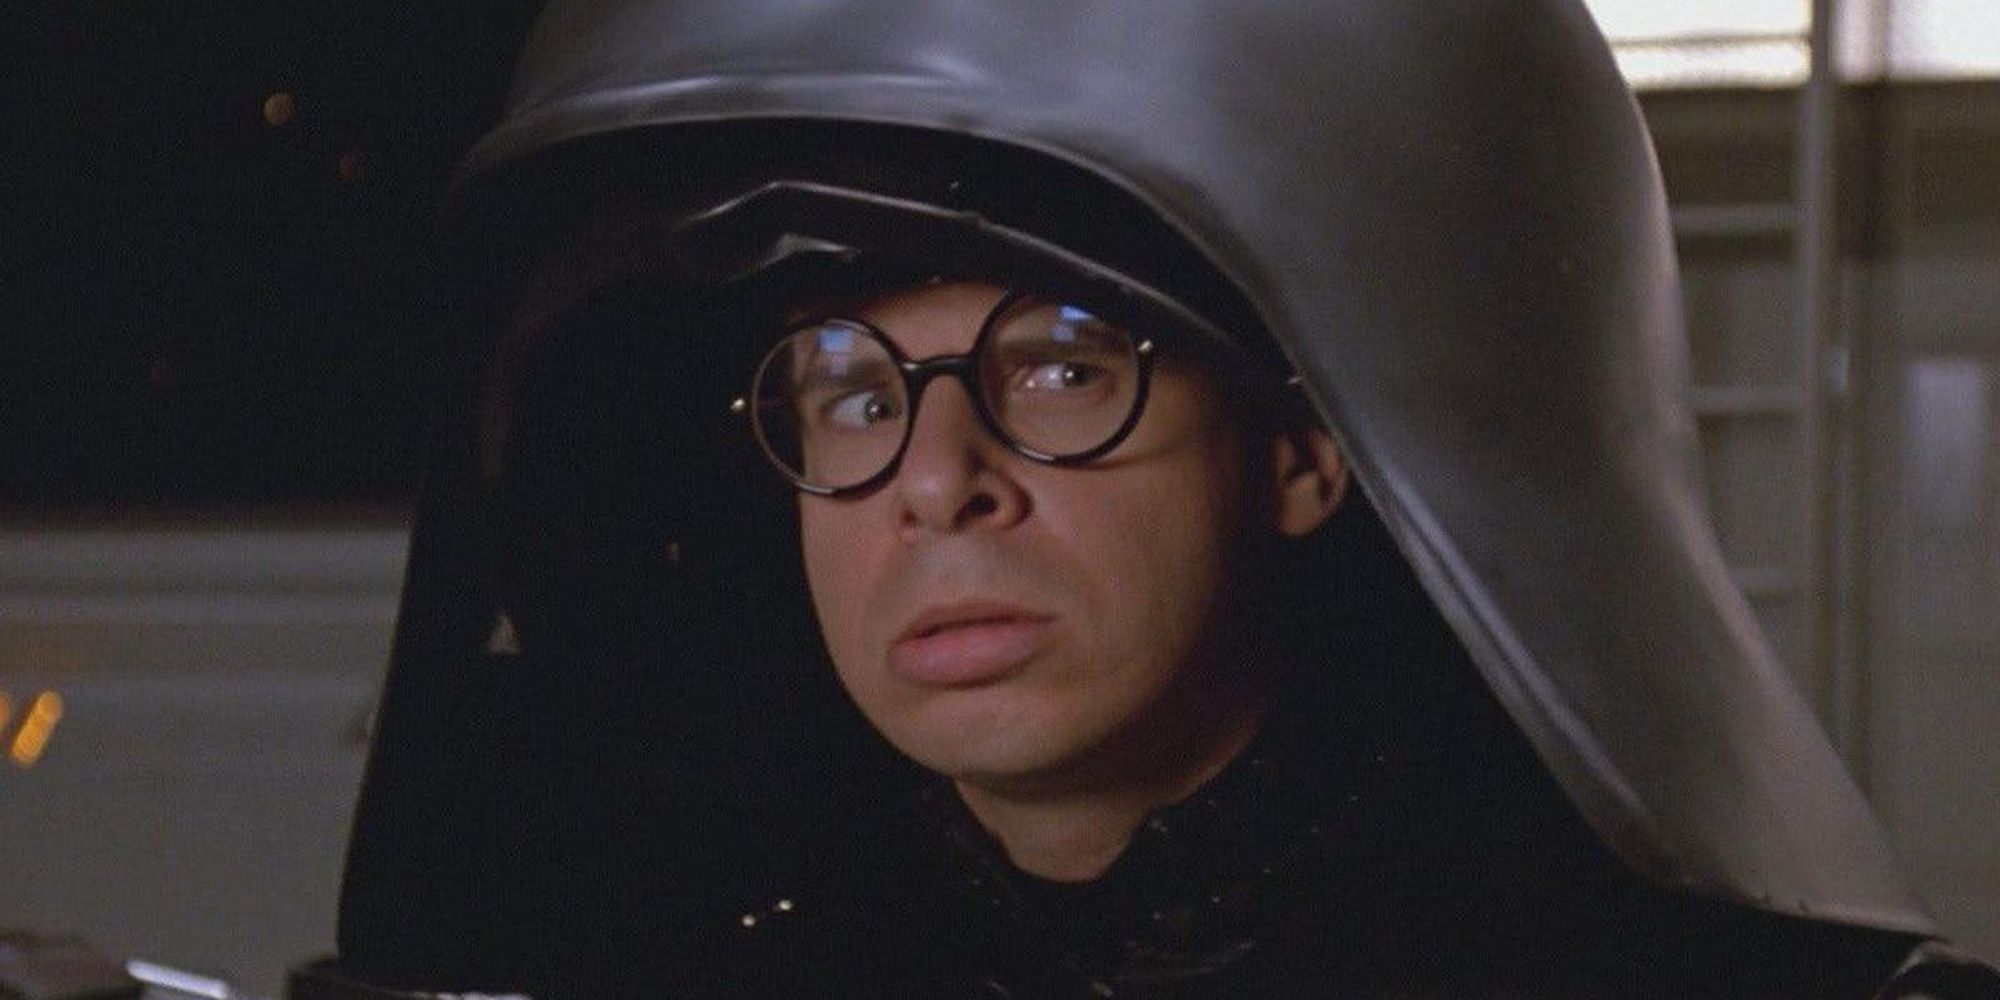 Dark Helmet from Spaceballs with his mask off